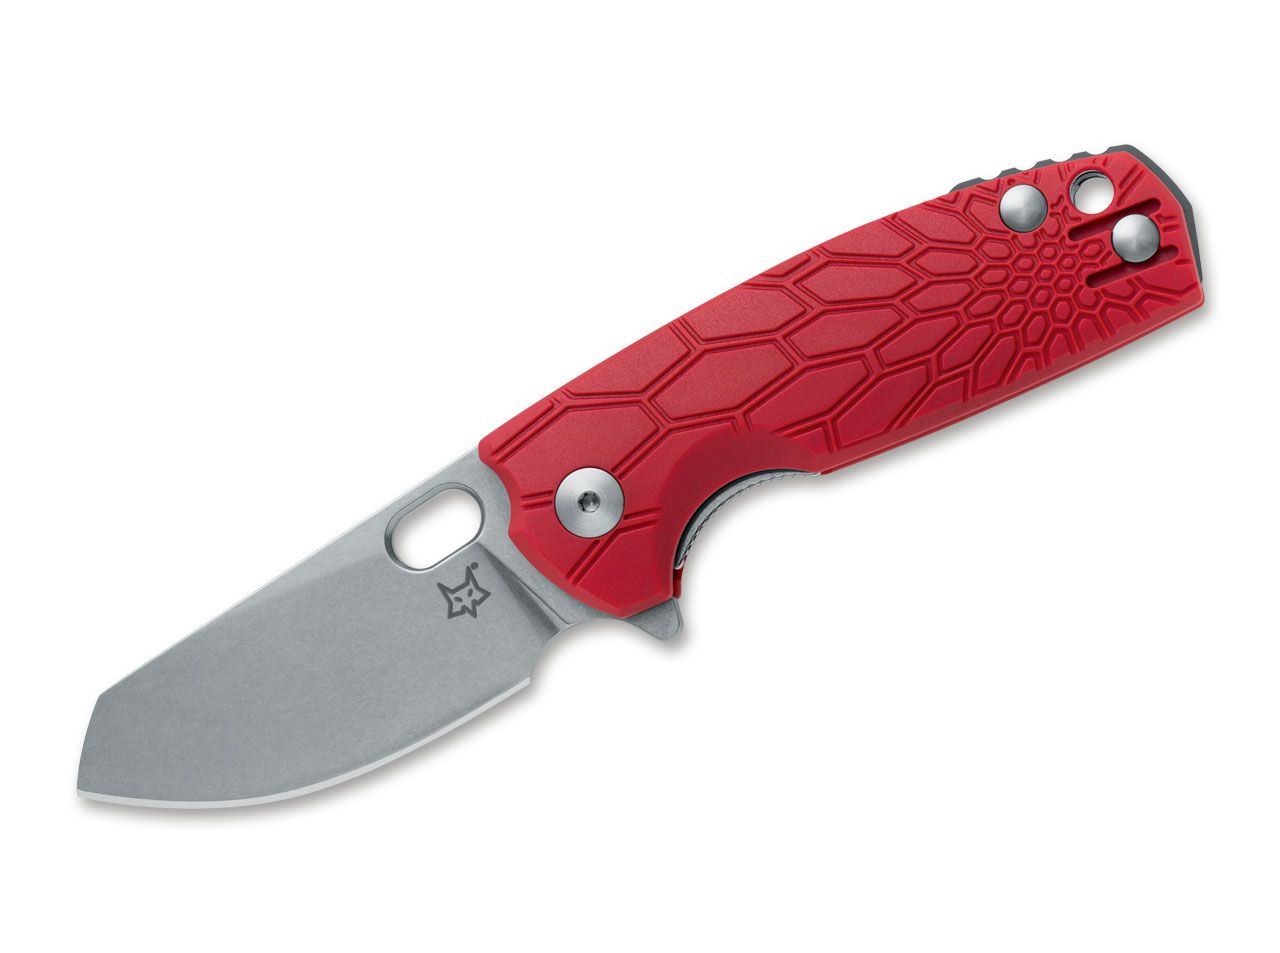 Fox Baby Core 2.36" N690Co Stonewash Red Folding Knife by Jesper Voxnaes FX-608 R